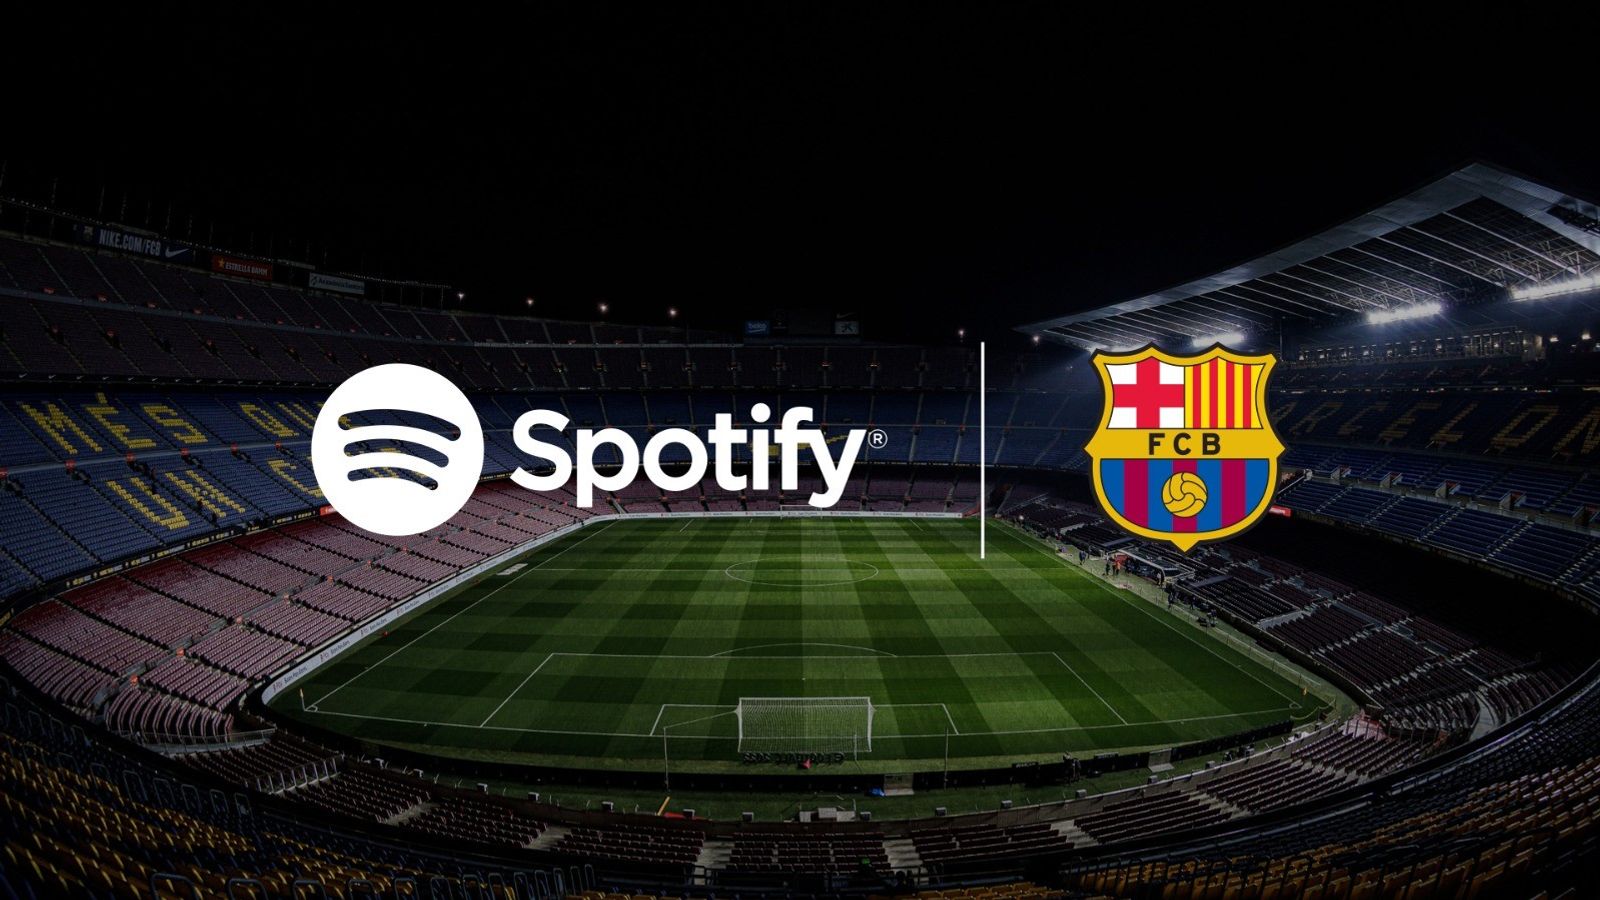 Barcelona to be sponsored by Spotify from 2022/23 season